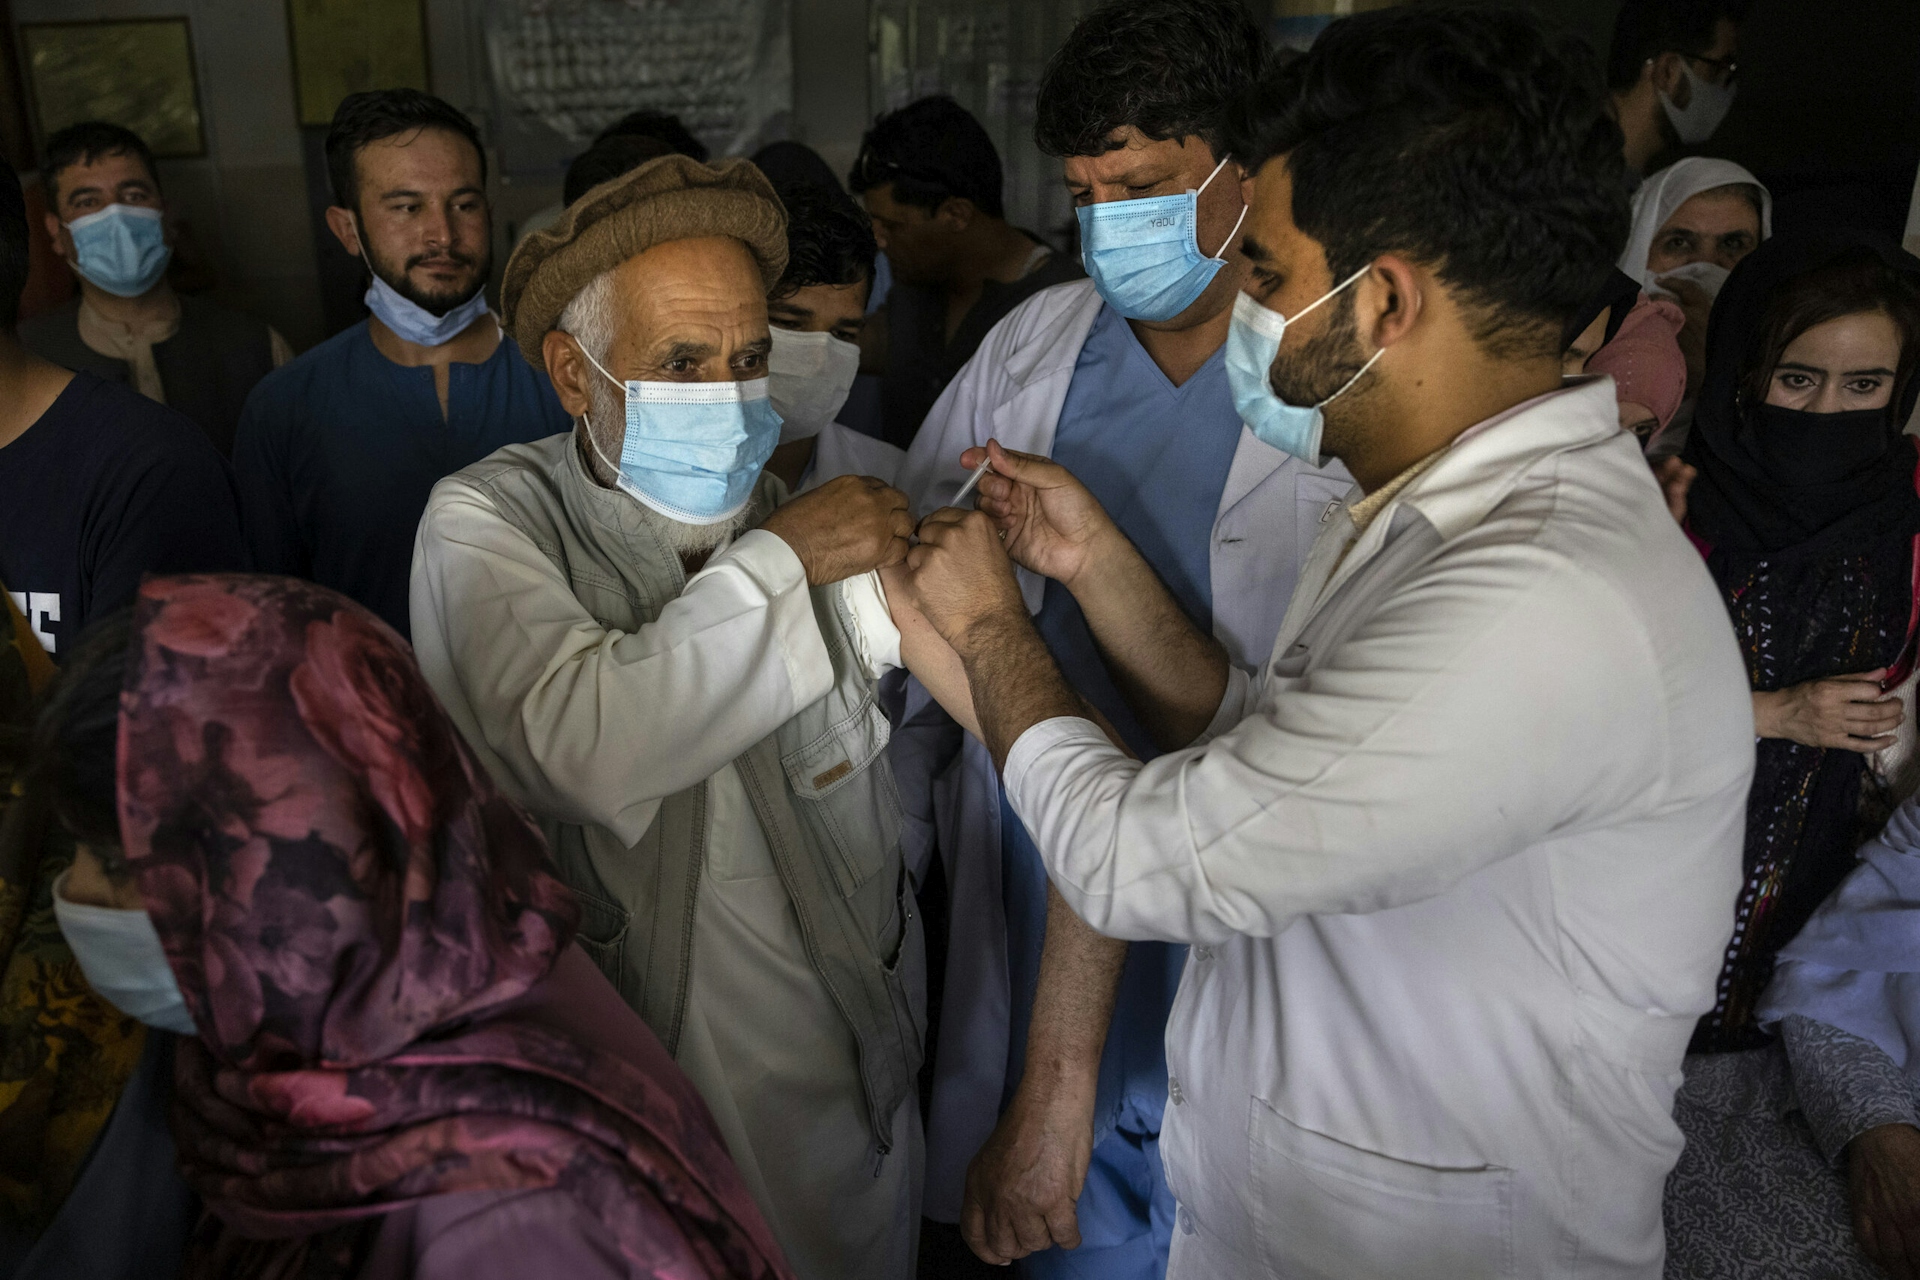 Image of Afghans getting vaccinated for COVID-19